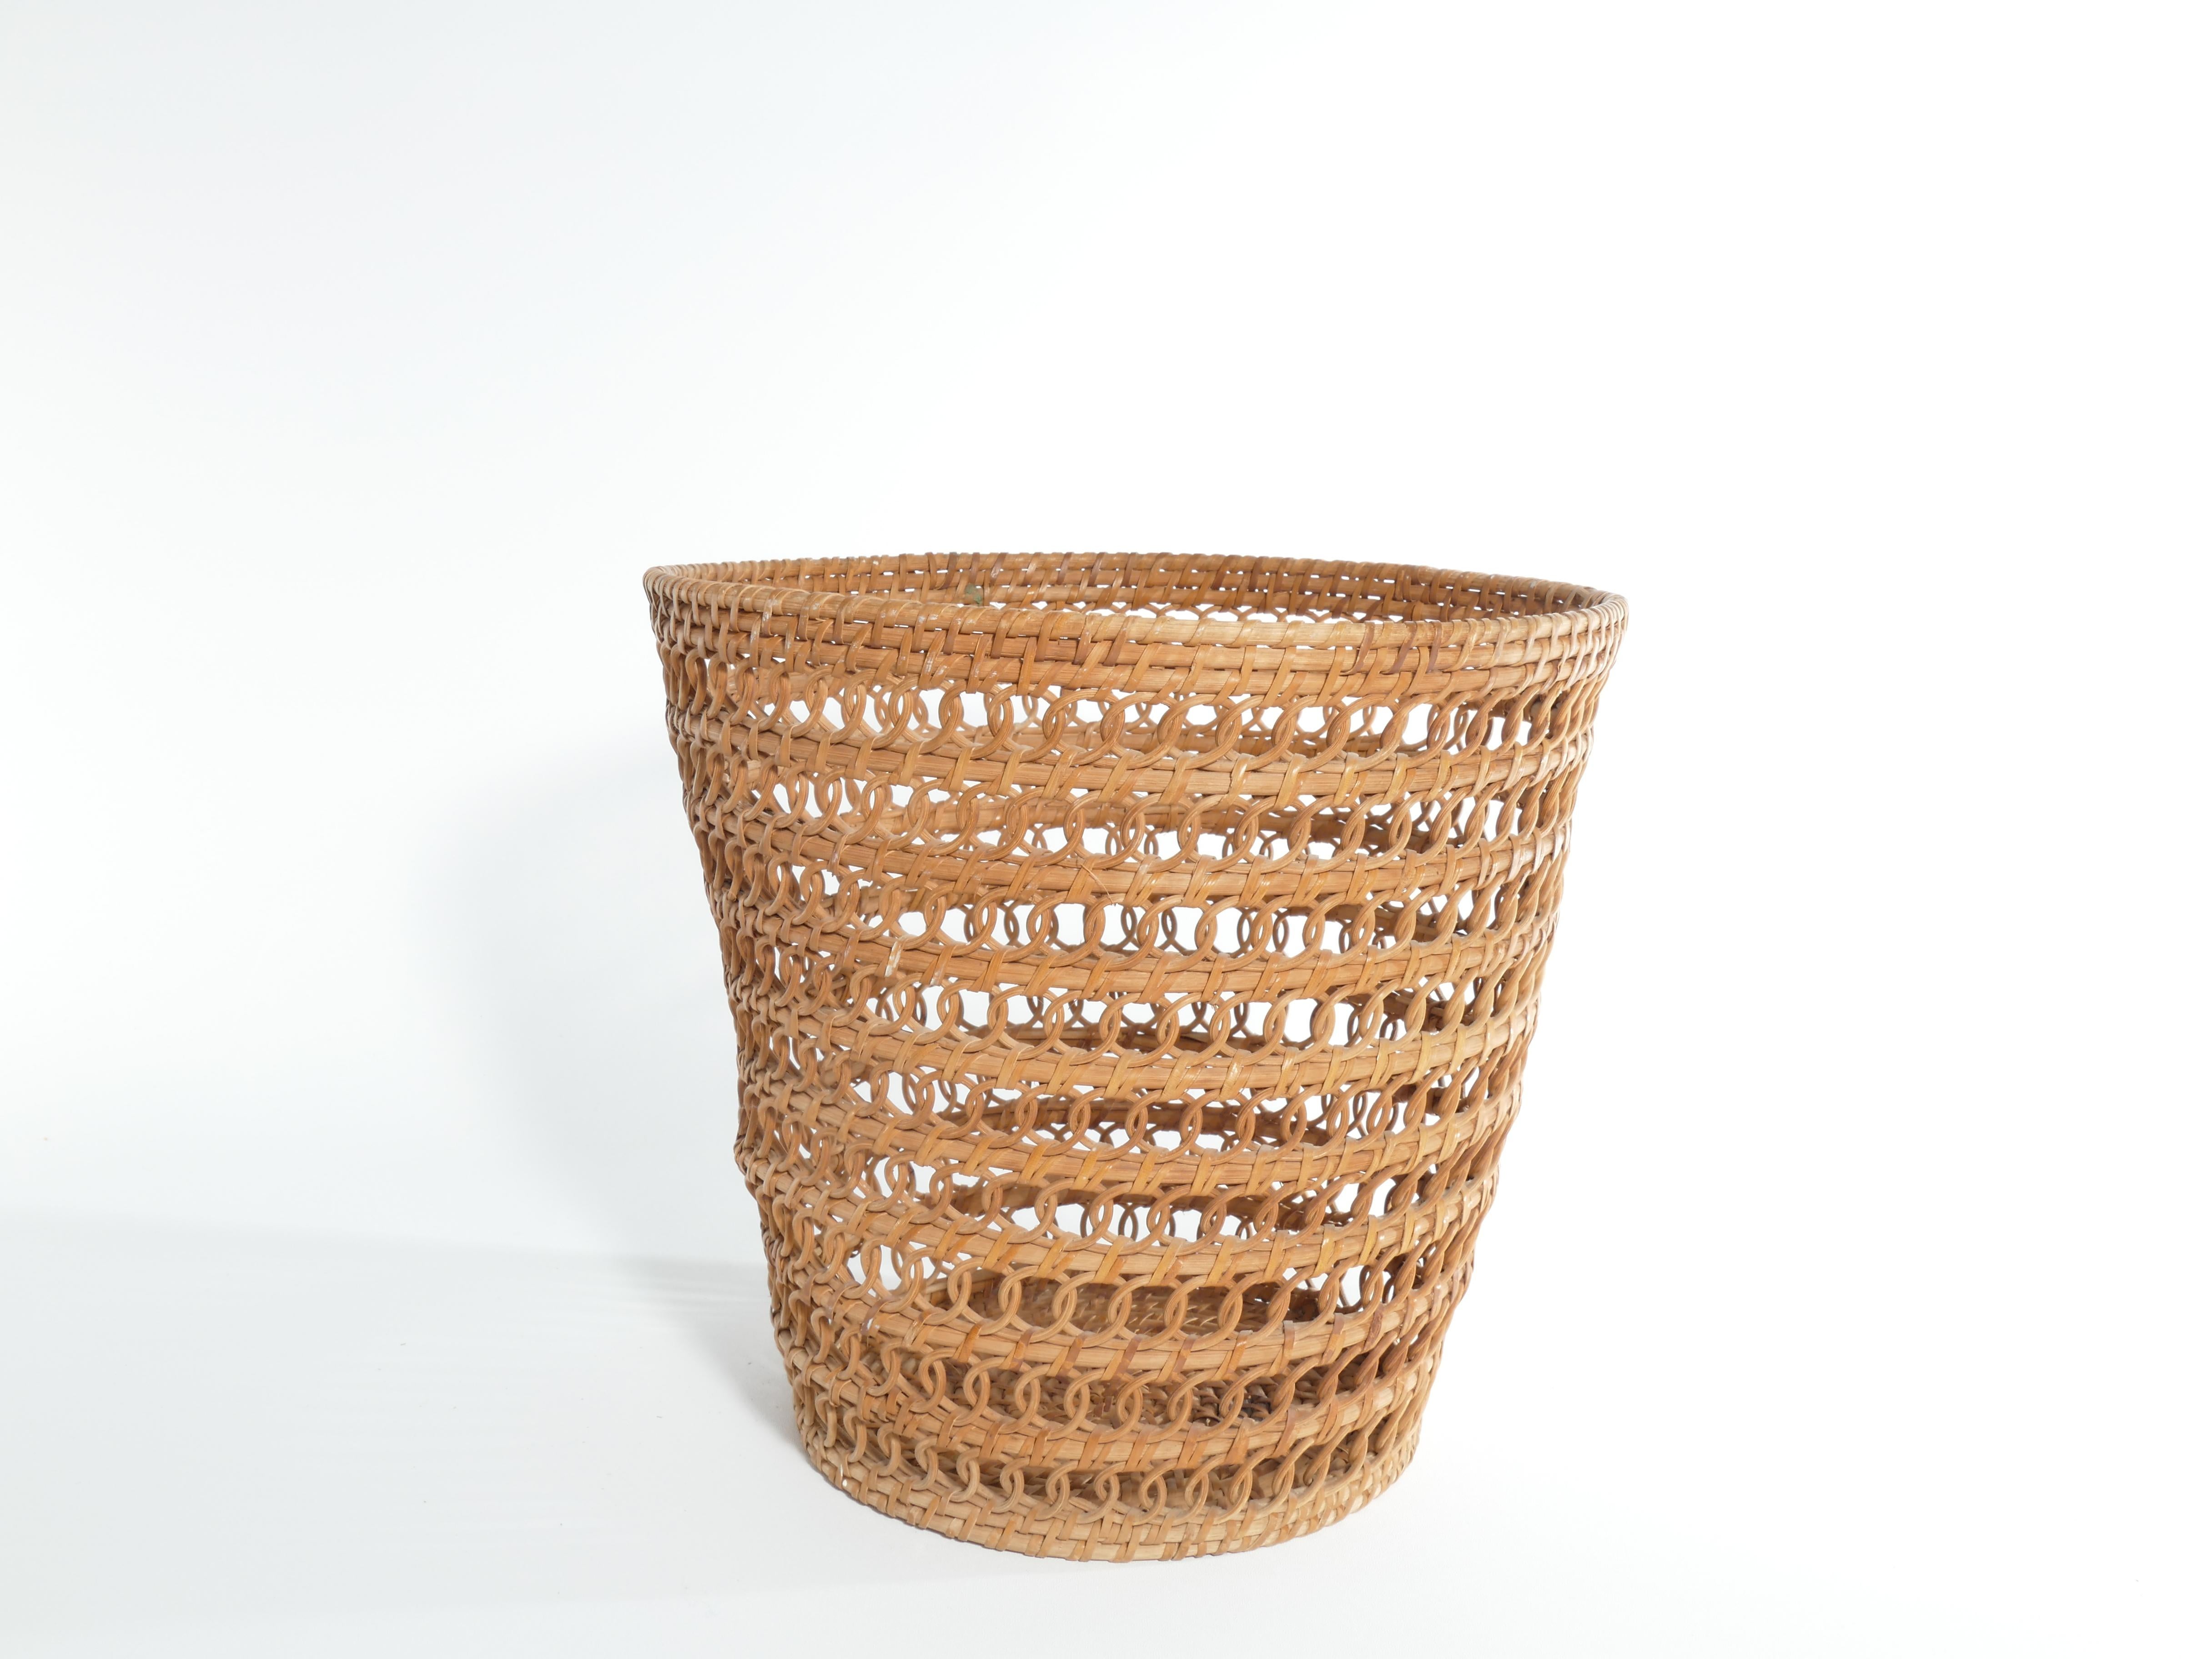 This handcrafted wicker wastebasket encapsulates the essence of mid-century modern design, boasting clean lines, organic materials, and a harmonious blend of form and function. Its gentle curves, lovely loop weave and woven texture add an element of